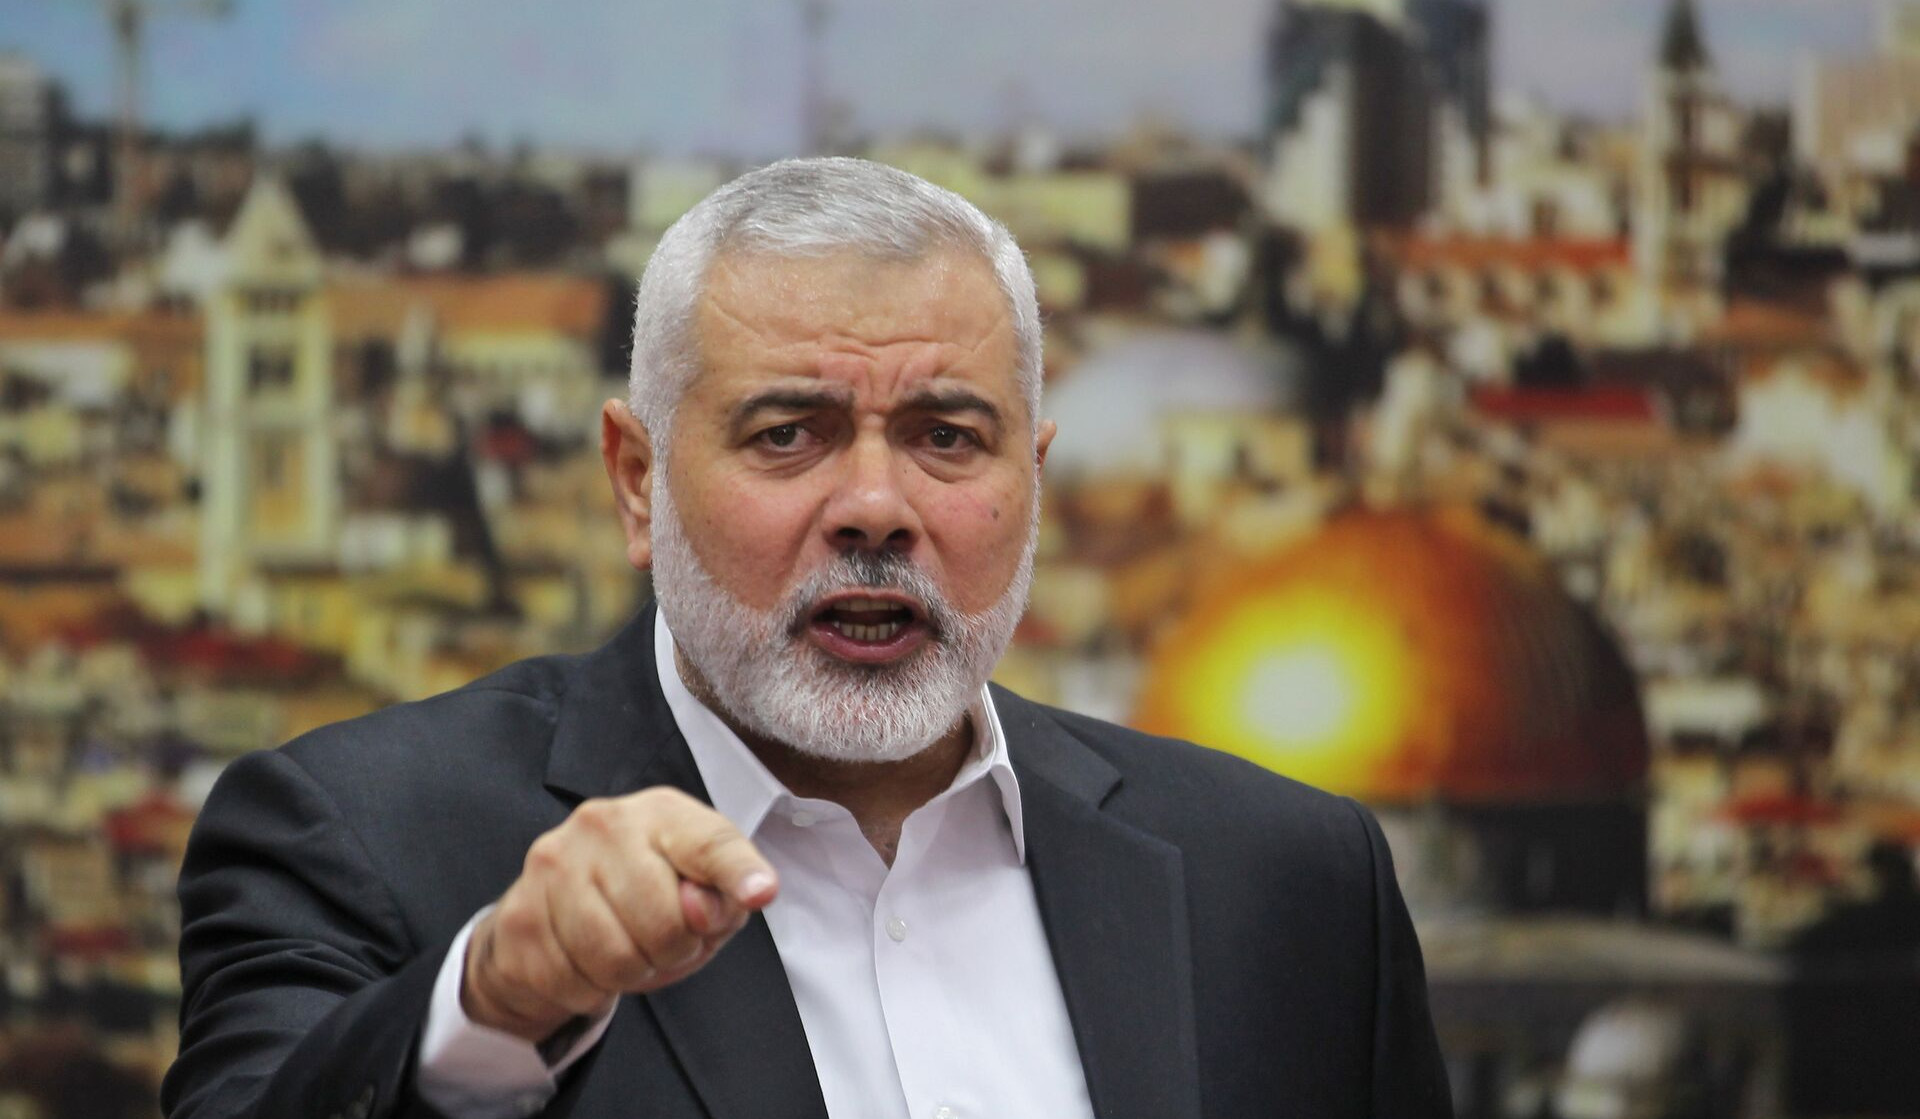 Hamas presented four conditions for indirect talks with Israel